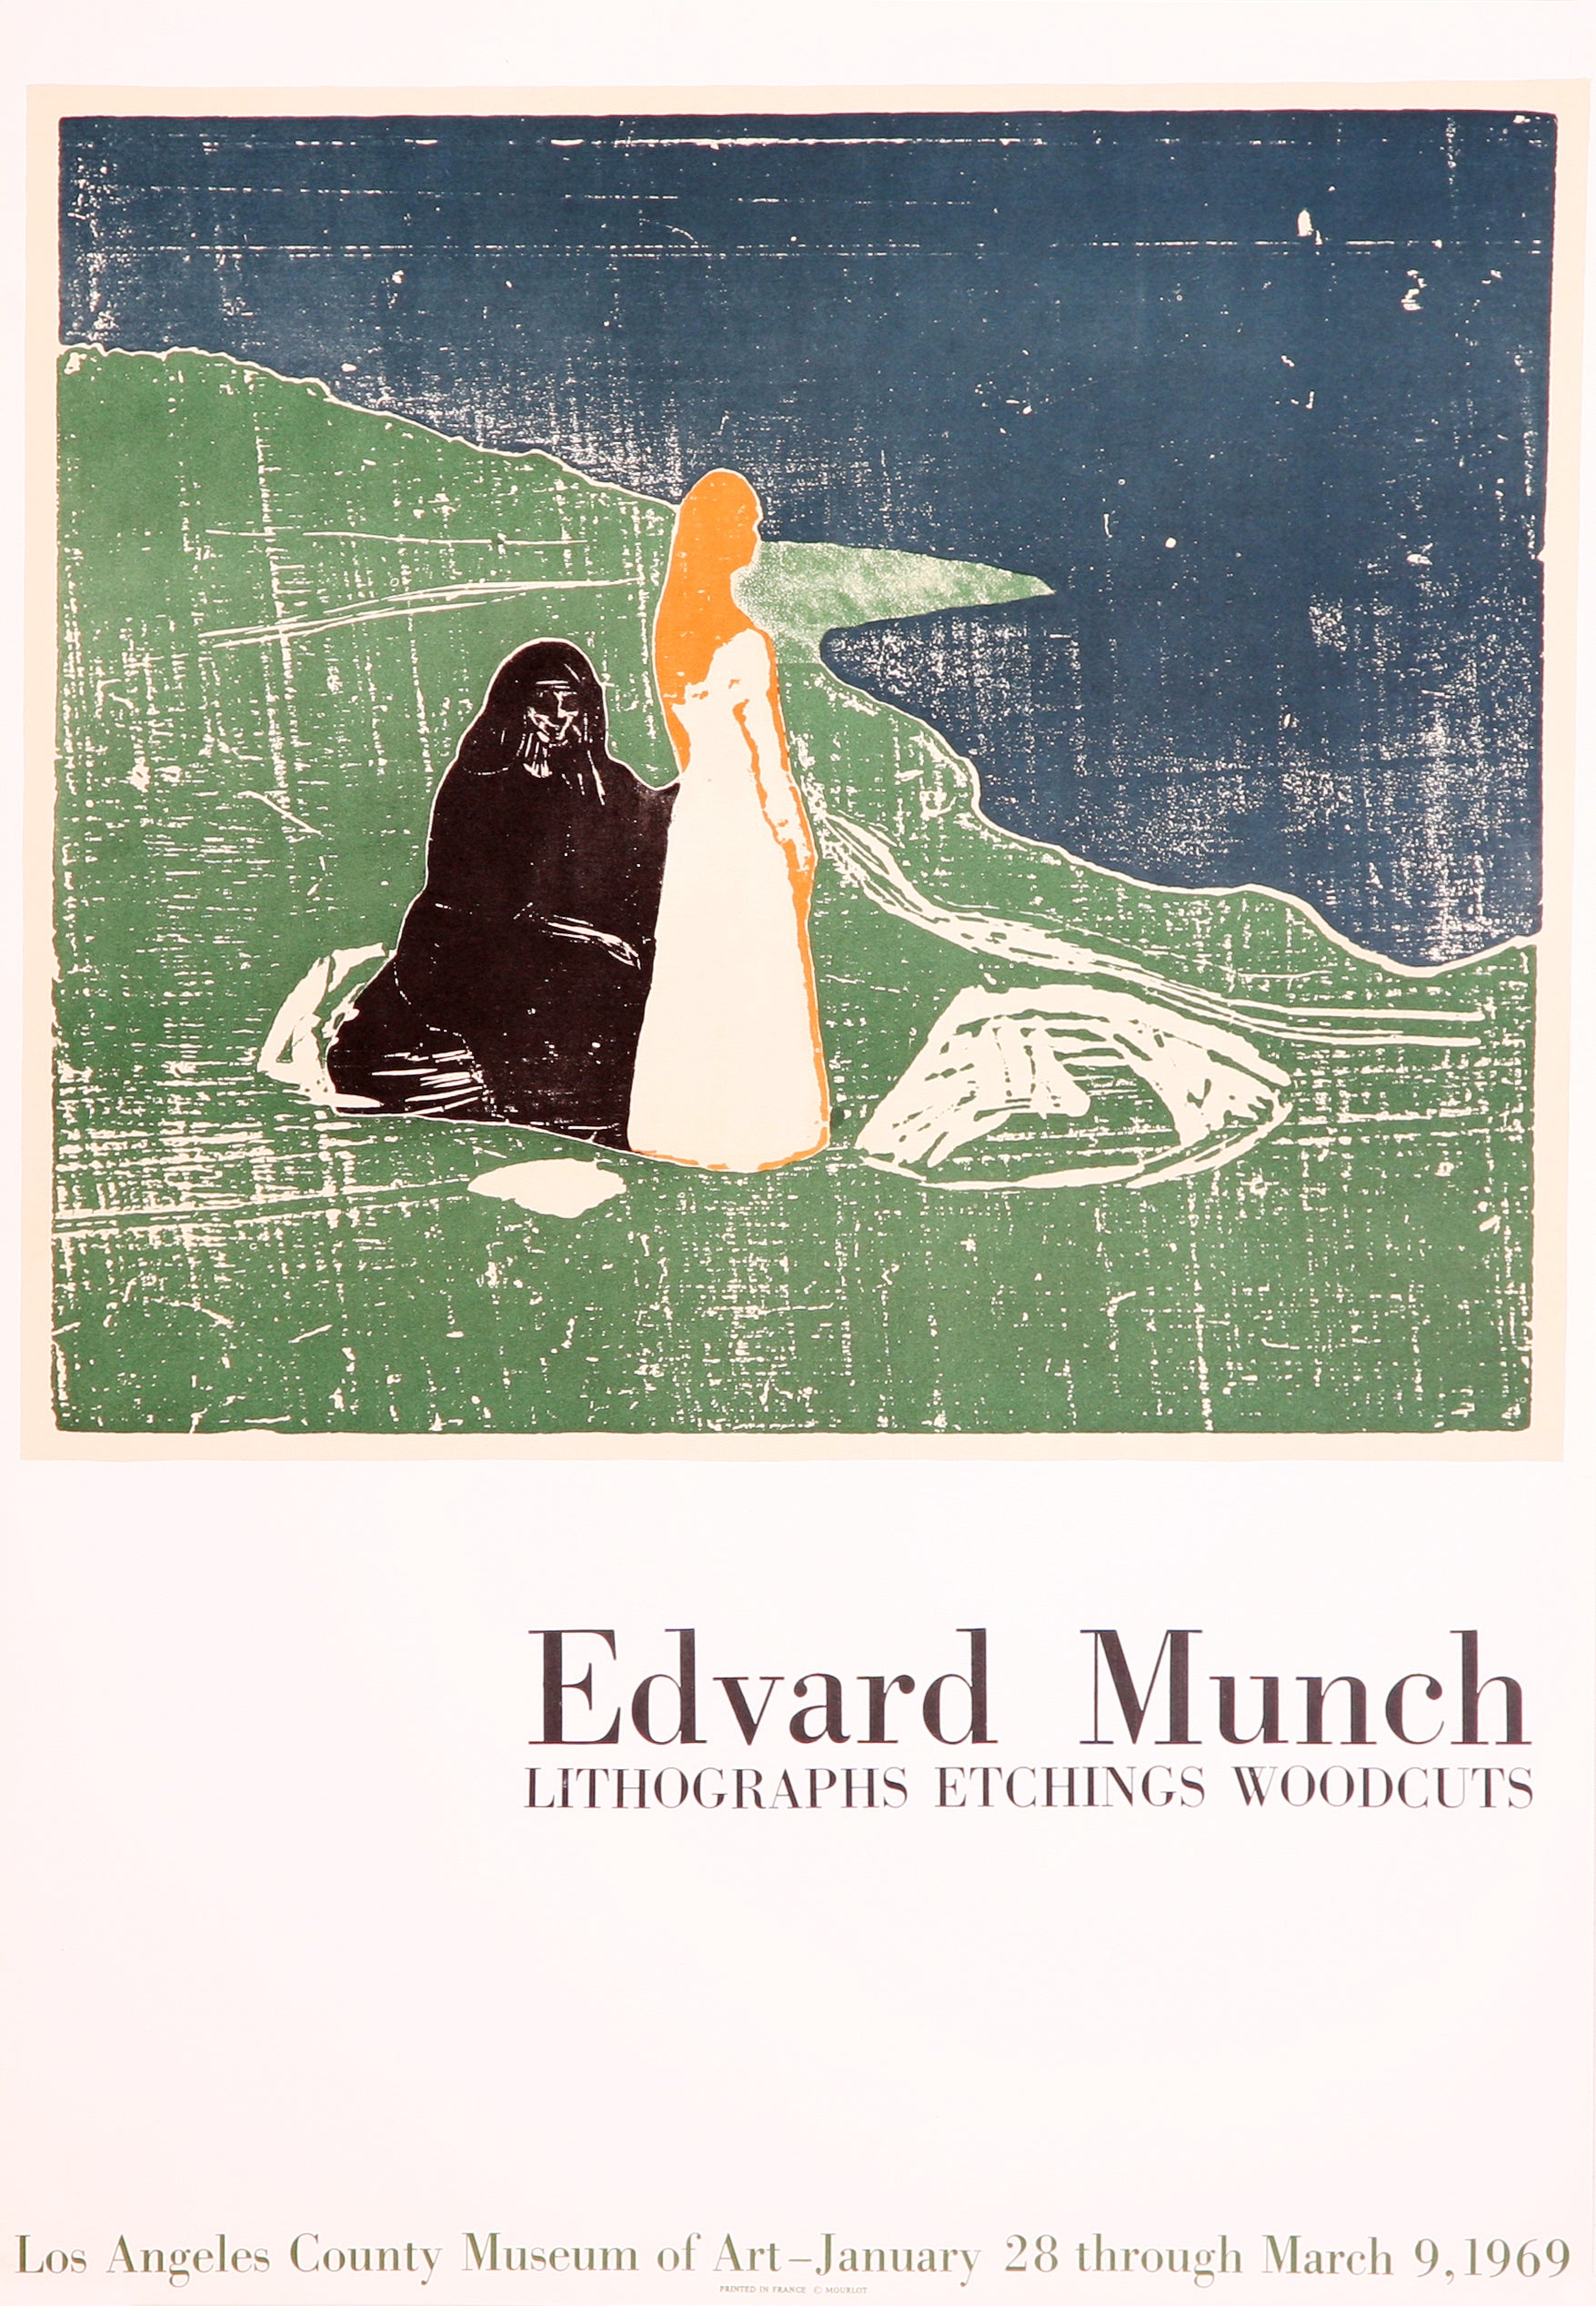 Two Women at the Seashore - LACMA (after) Edvard Munch, 1969 - Mourlot Editions - Fine_Art - Poster - Lithograph - Wall Art - Vintage - Prints - Original